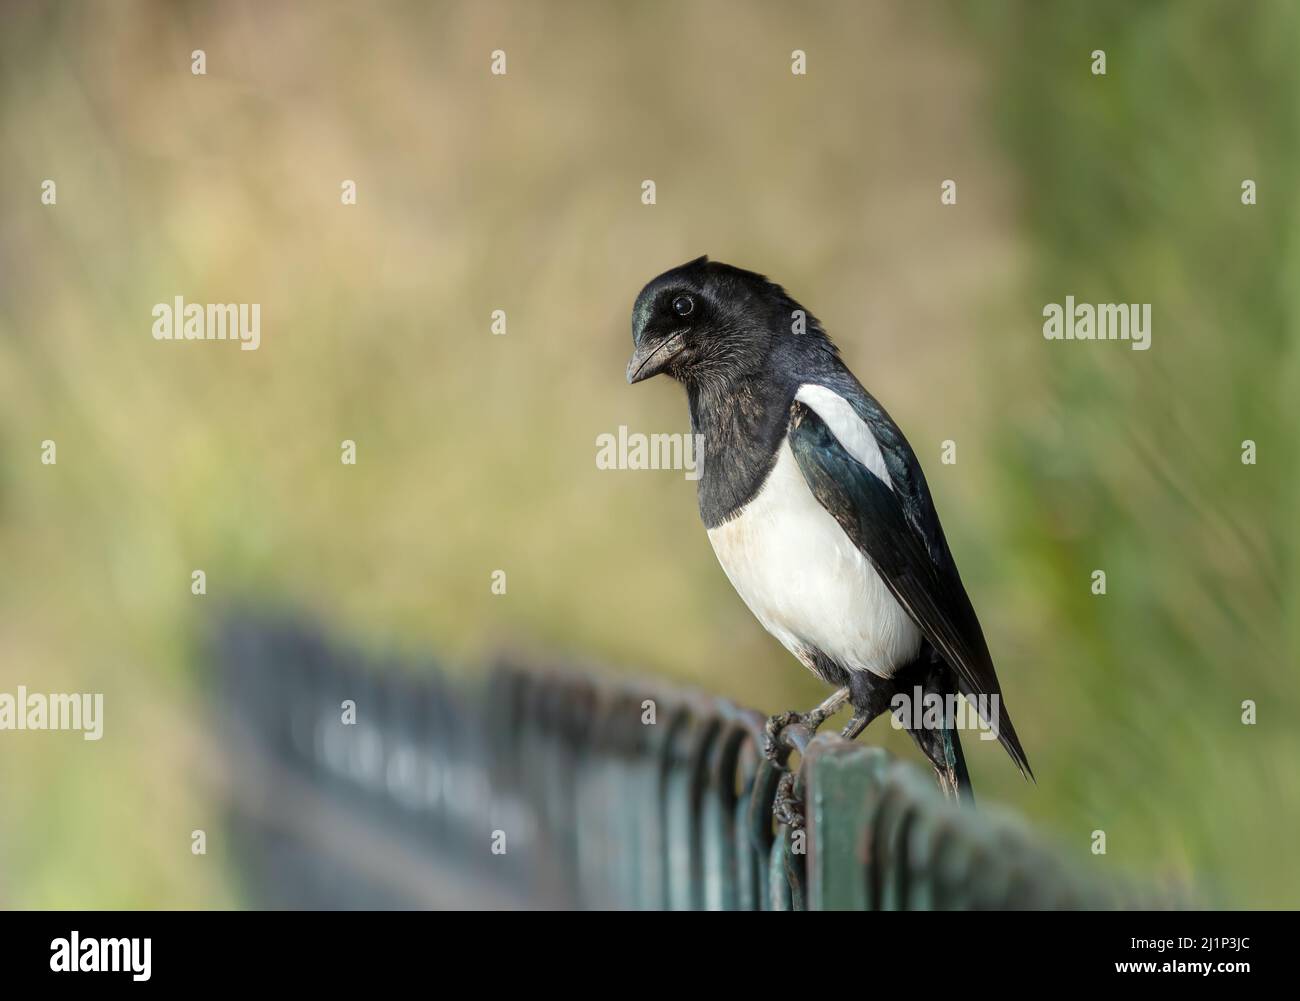 Close up of an Eurasian Magpie perched on a metal fence in a park, UK. Stock Photo